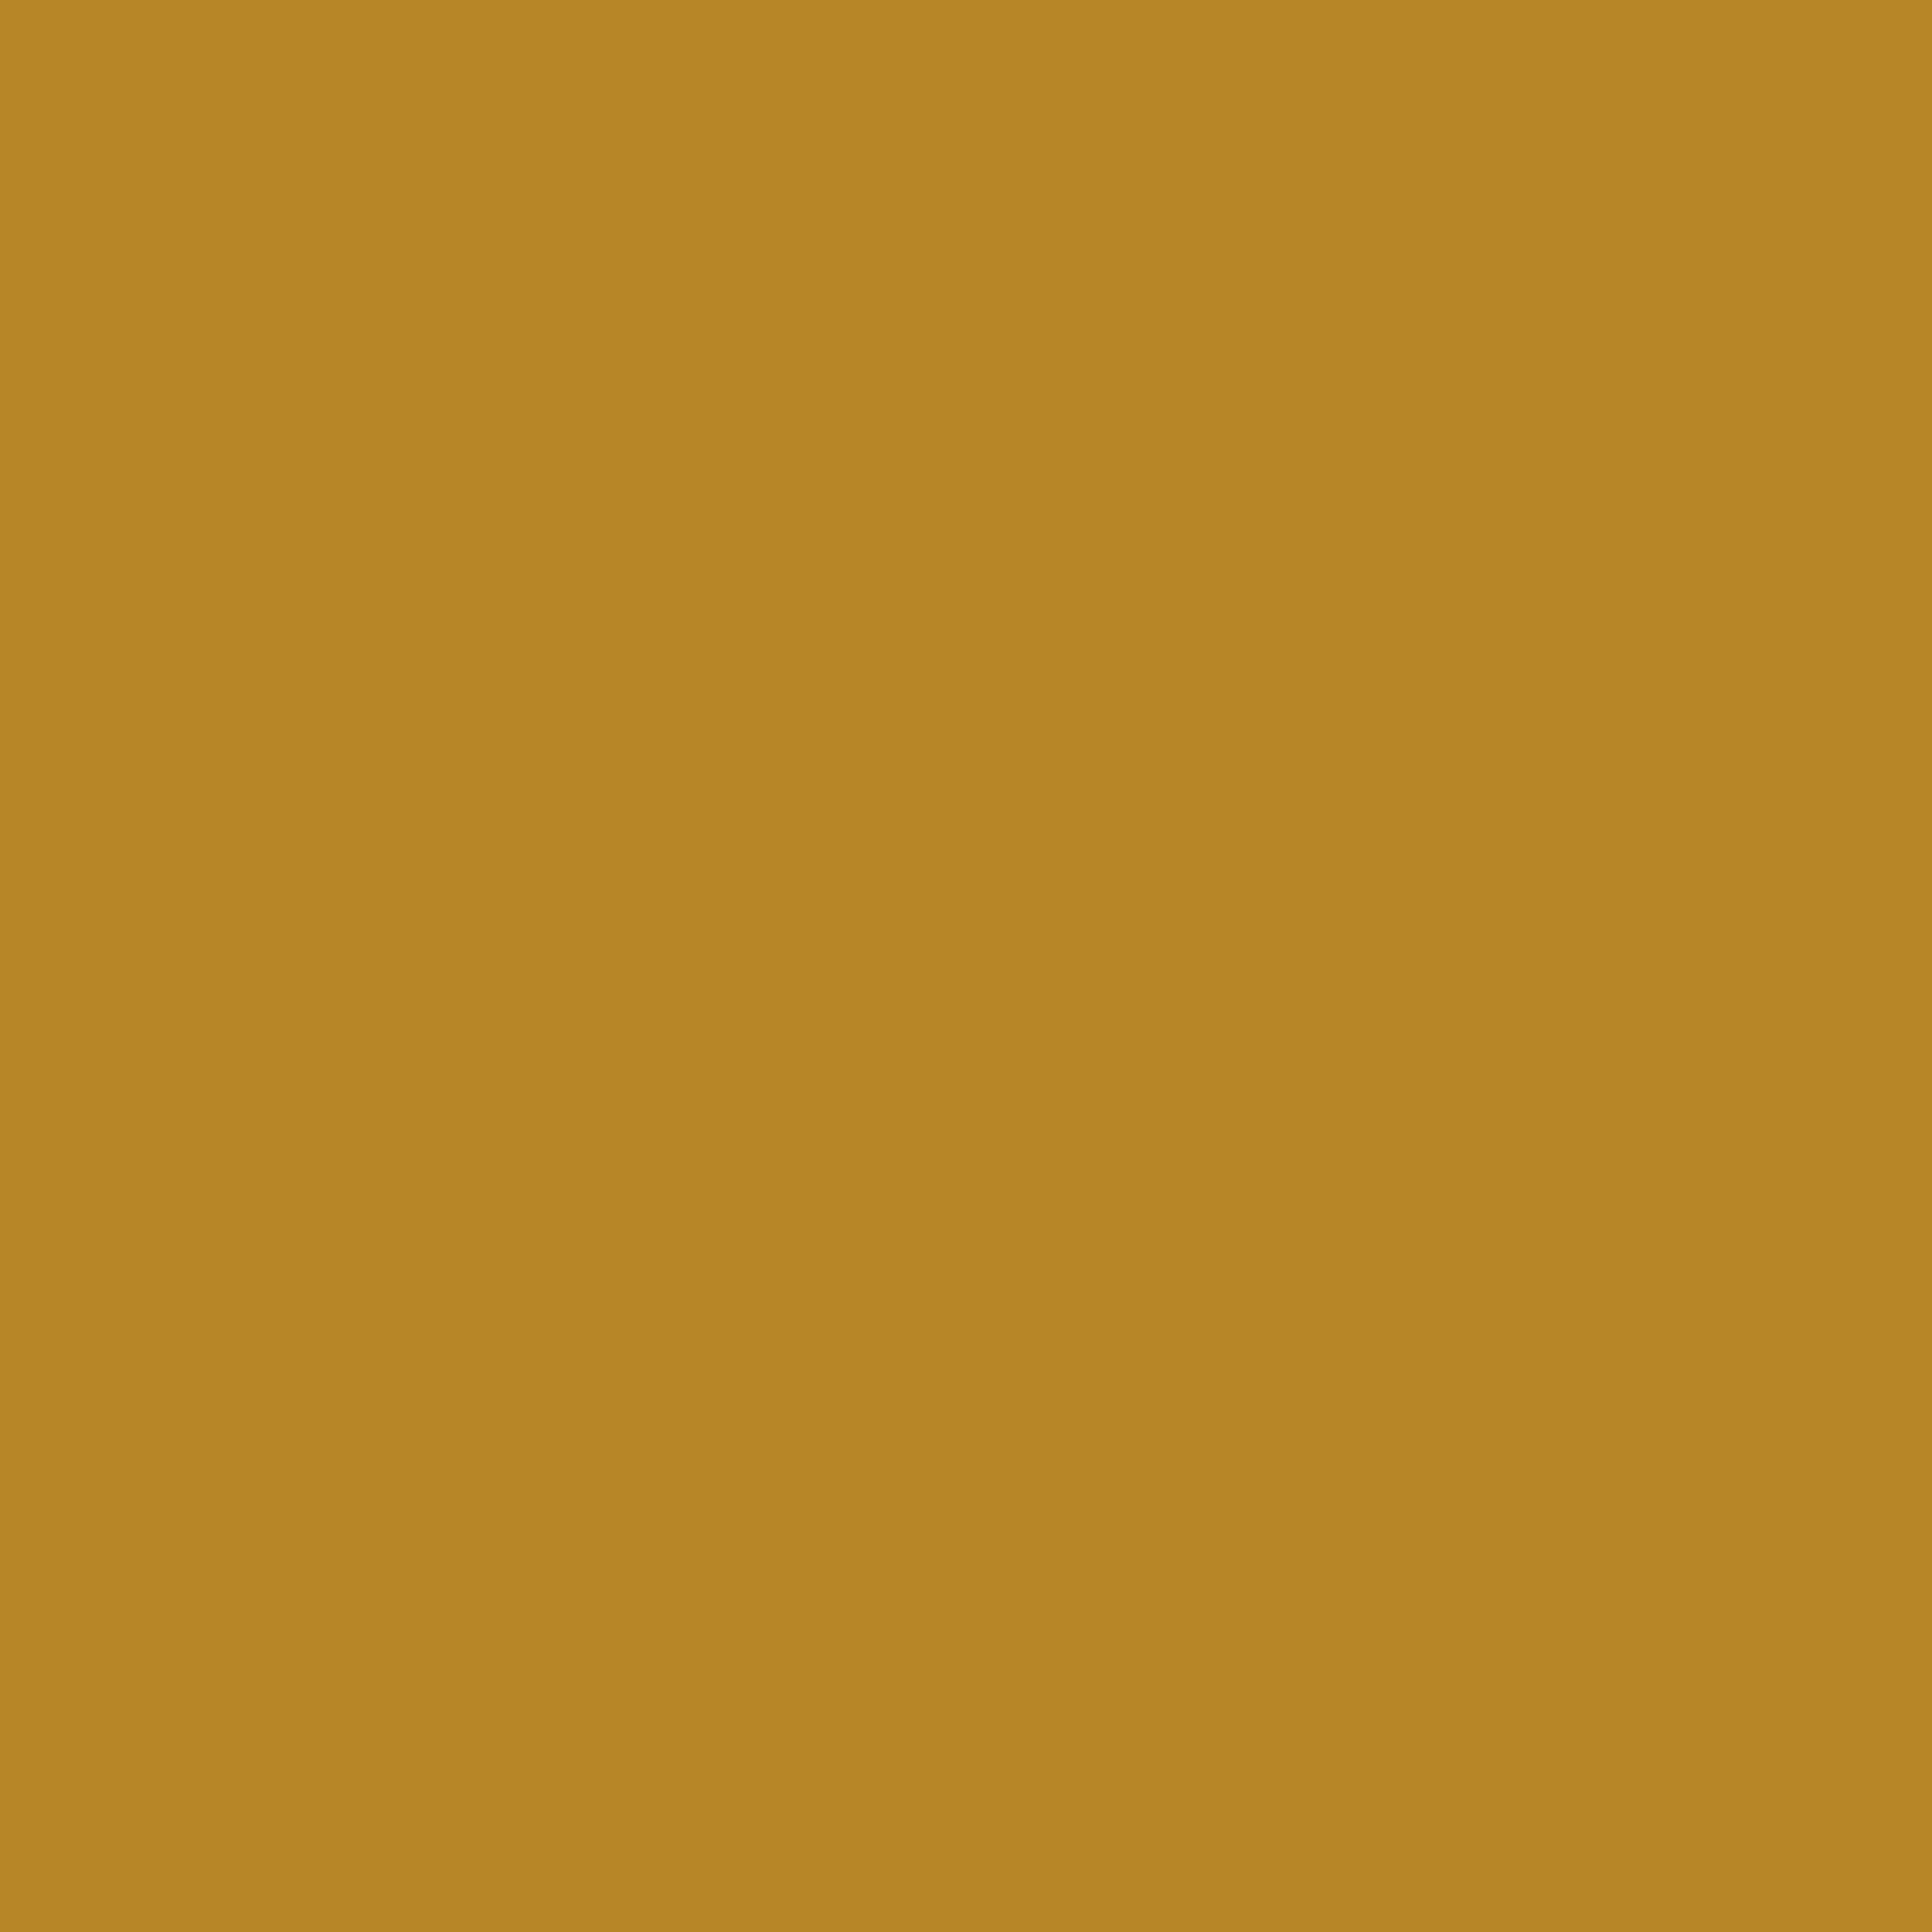 2048x2048 University Of California Gold Solid Color Background